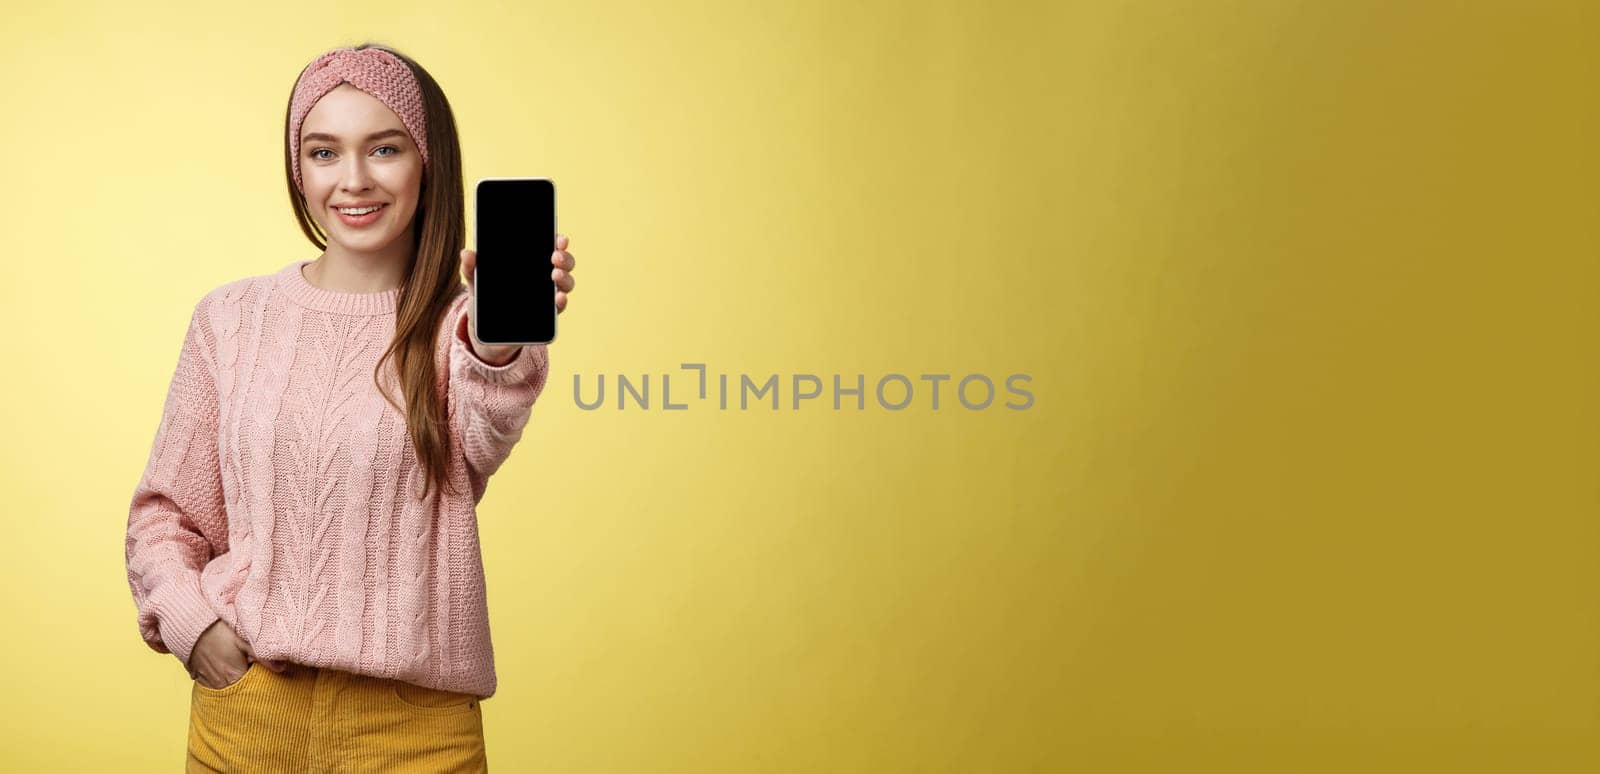 Best smartphone here you go. Charming outgoing young pretty woman in knitted sweater, headband extending hand with phone showing gadget screen smiling recommending cellphone over yellow wall.